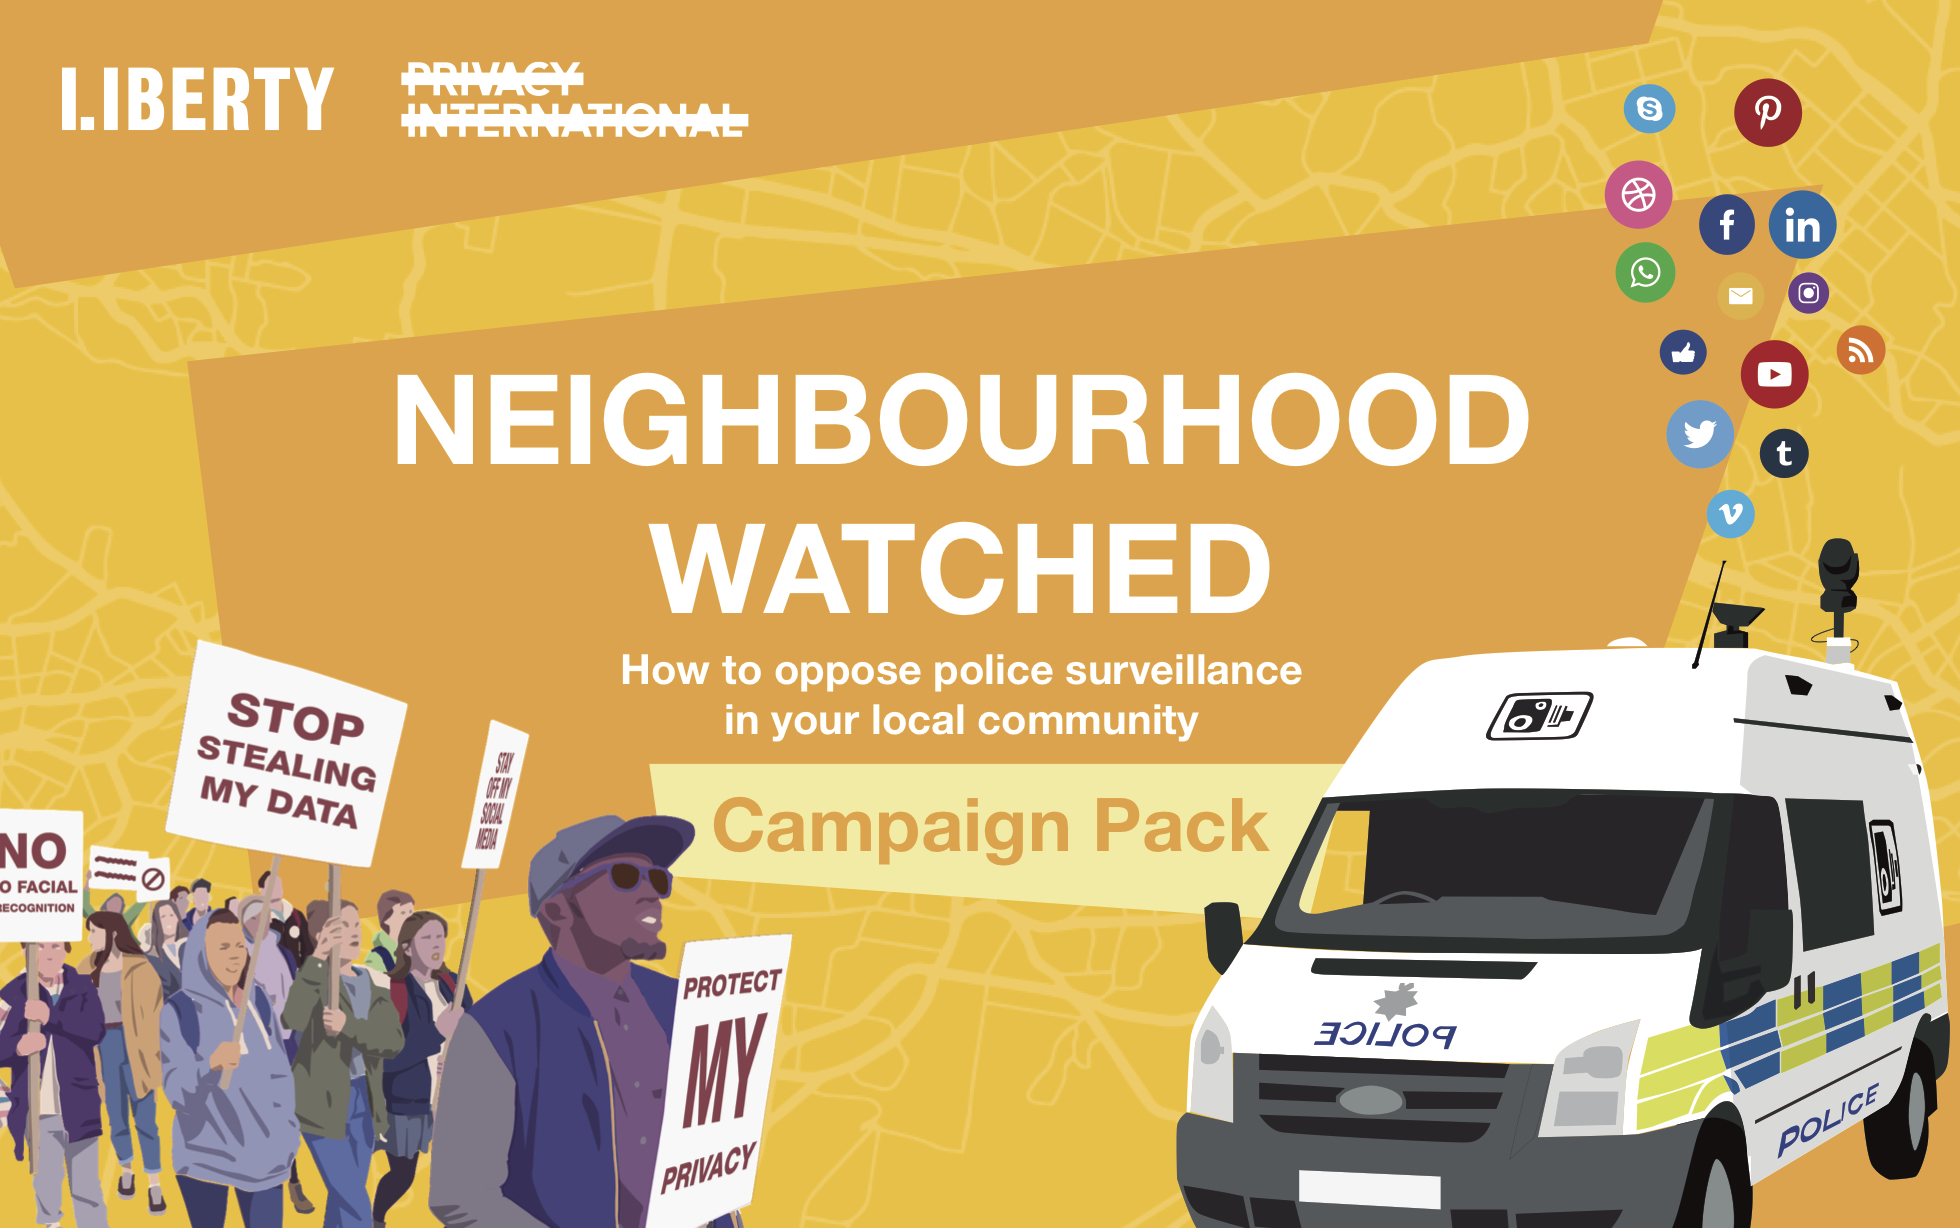 NeighbourhoodWatched Campaign